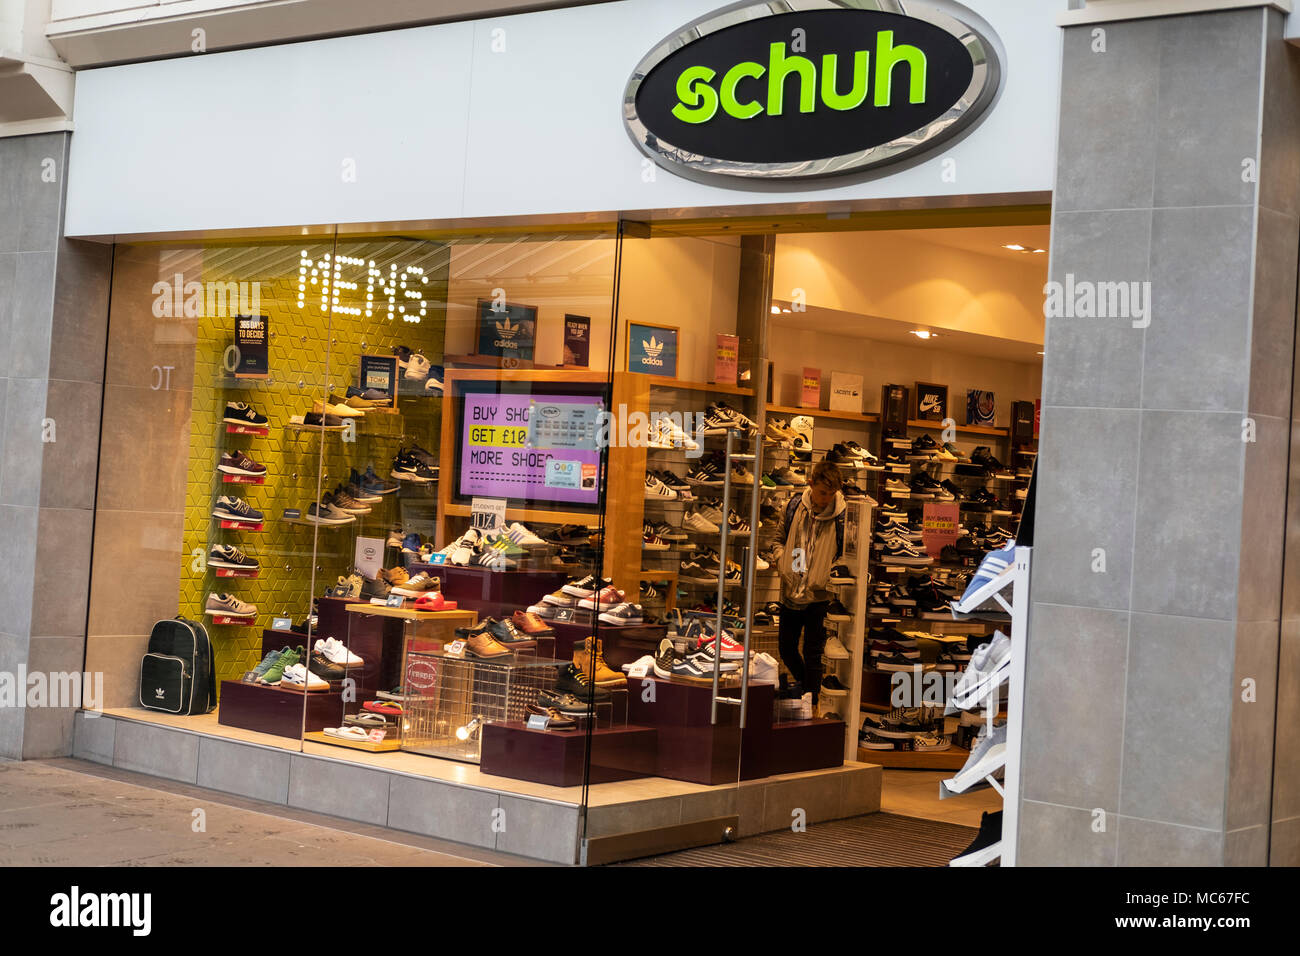 Salisbury Store High Resolution Stock Photography and Images - Alamy